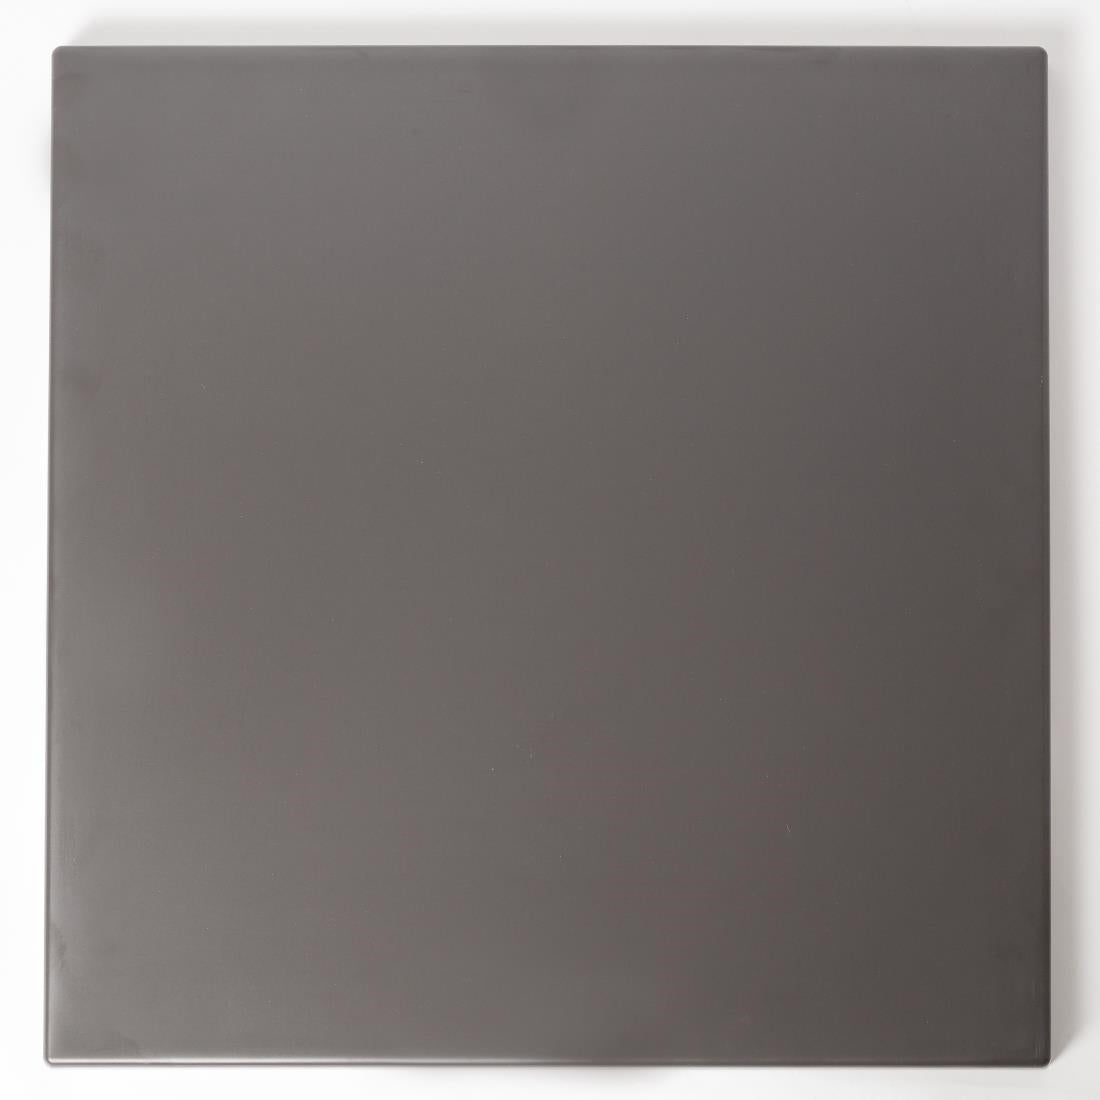 GR636 Werzalit Pre-drilled Square Table Top  Dark Grey 700mm JD Catering Equipment Solutions Ltd